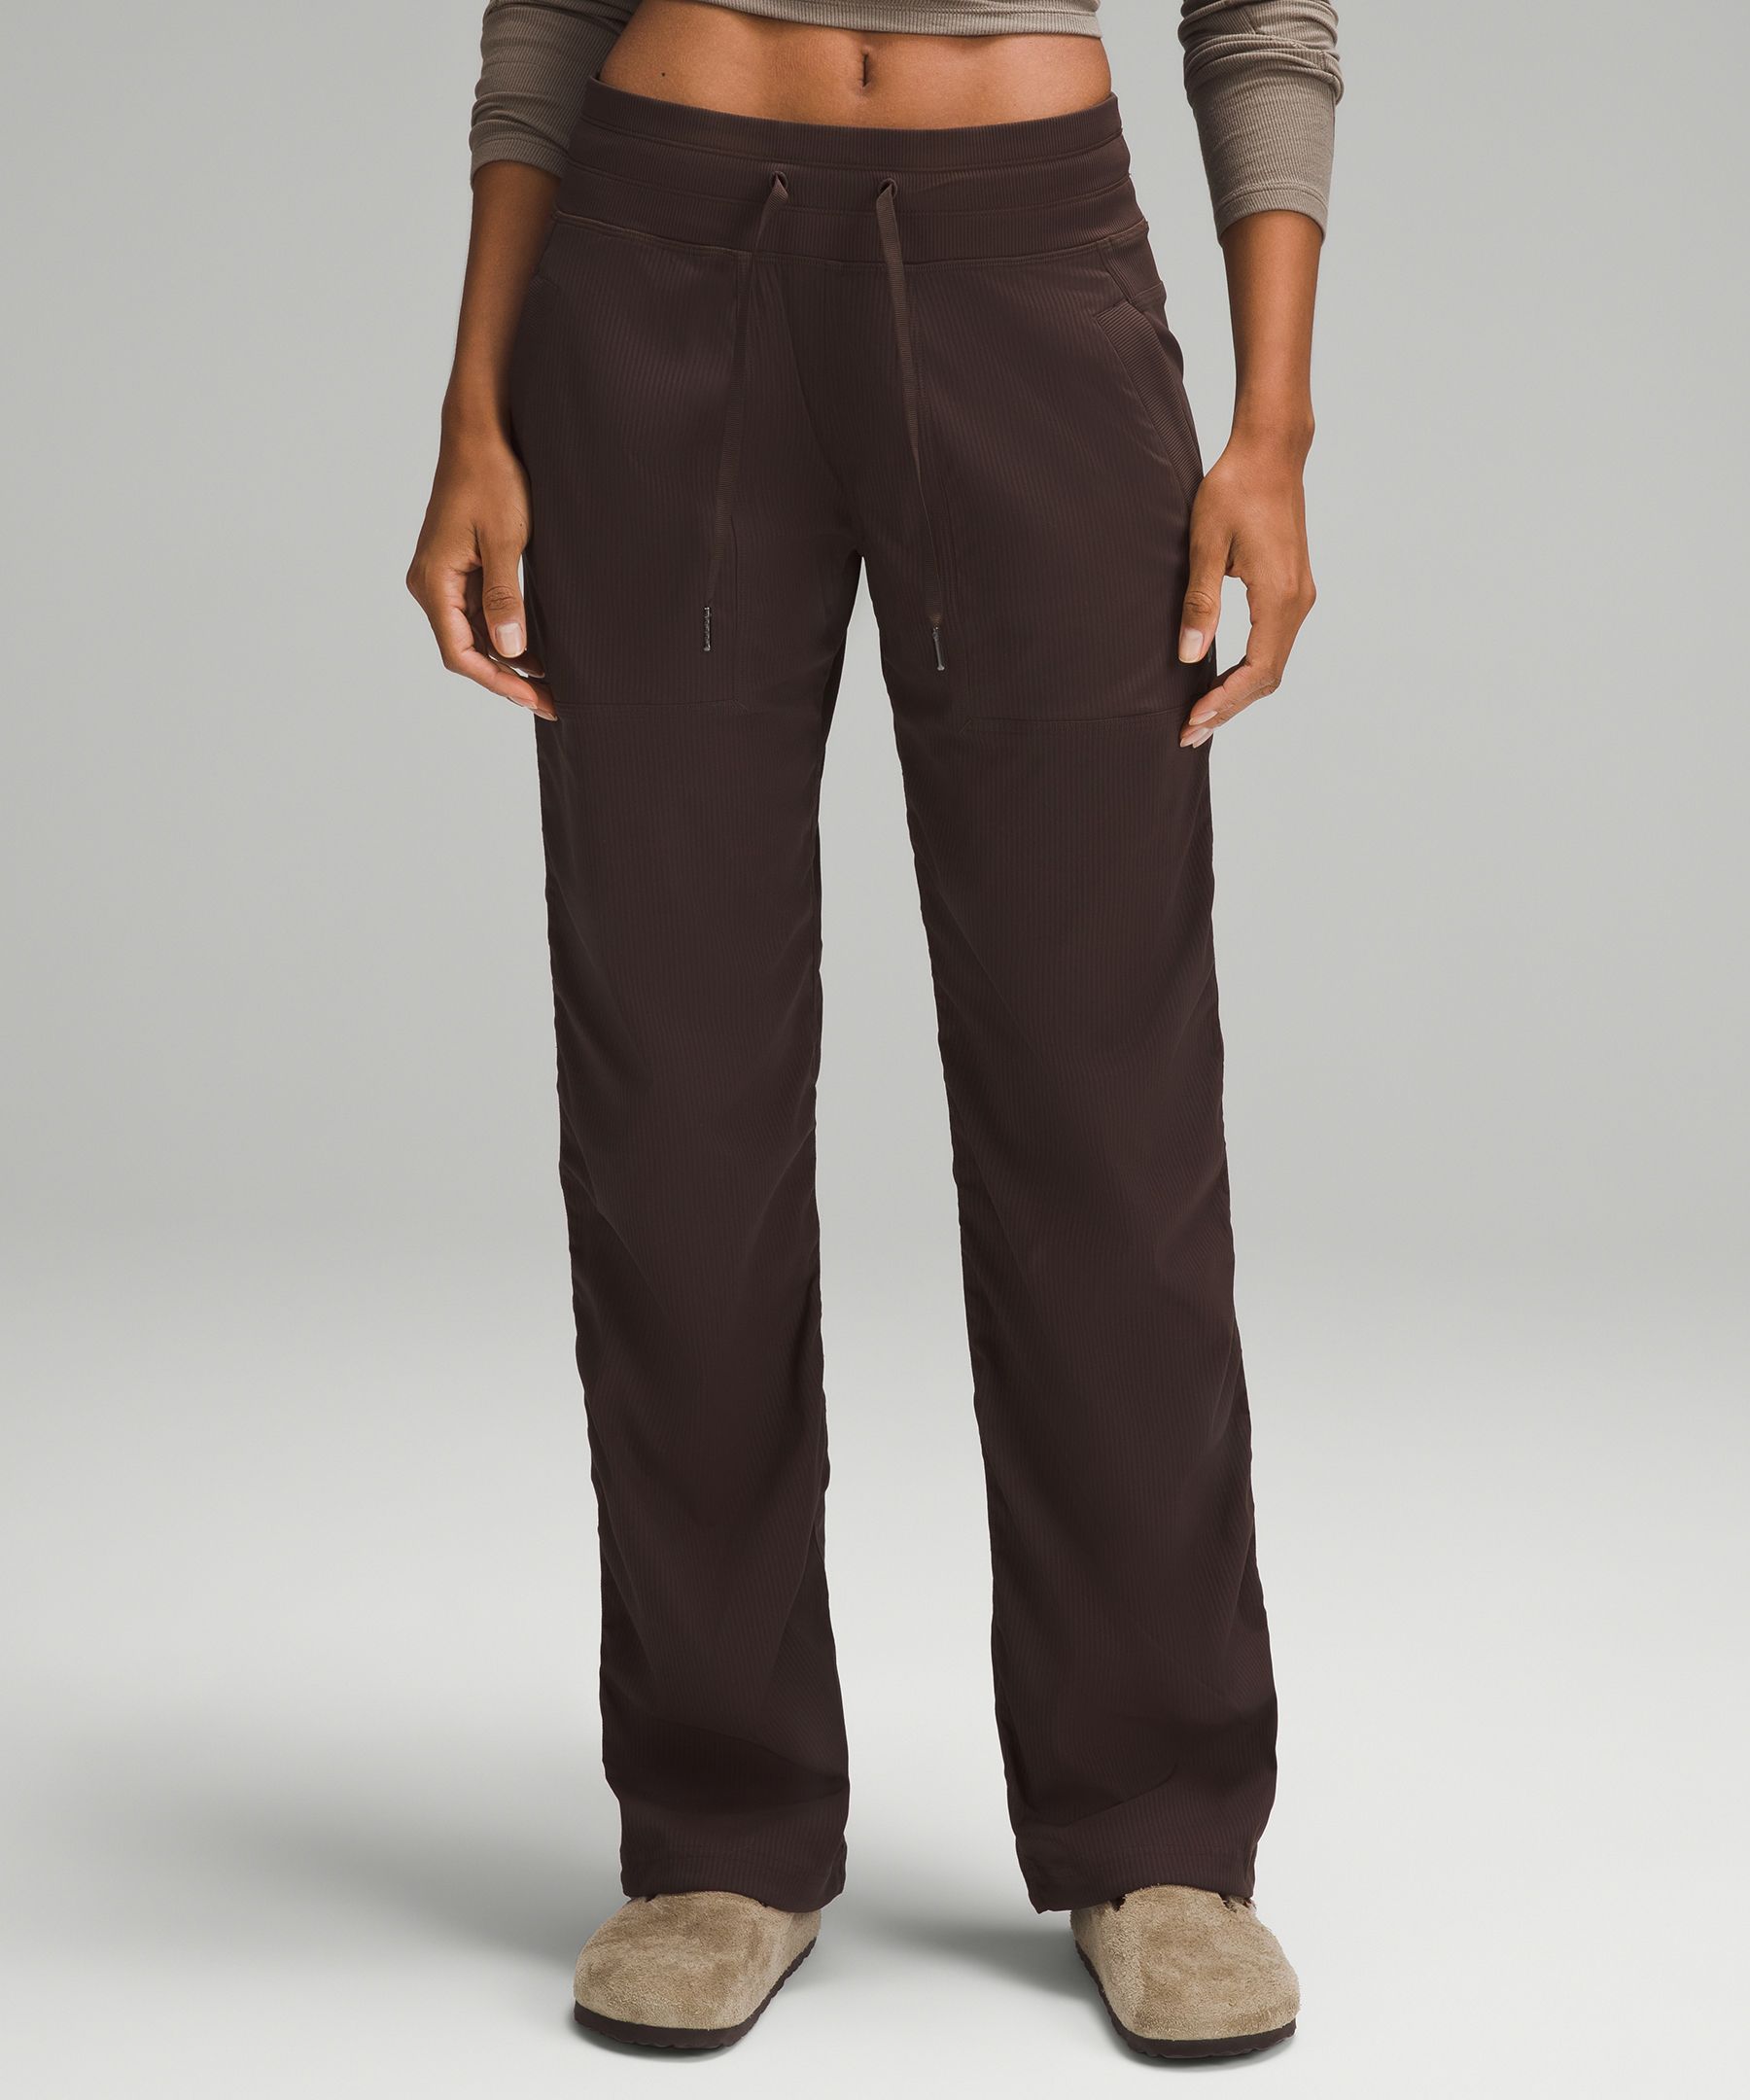 Women's Pocketed Pants